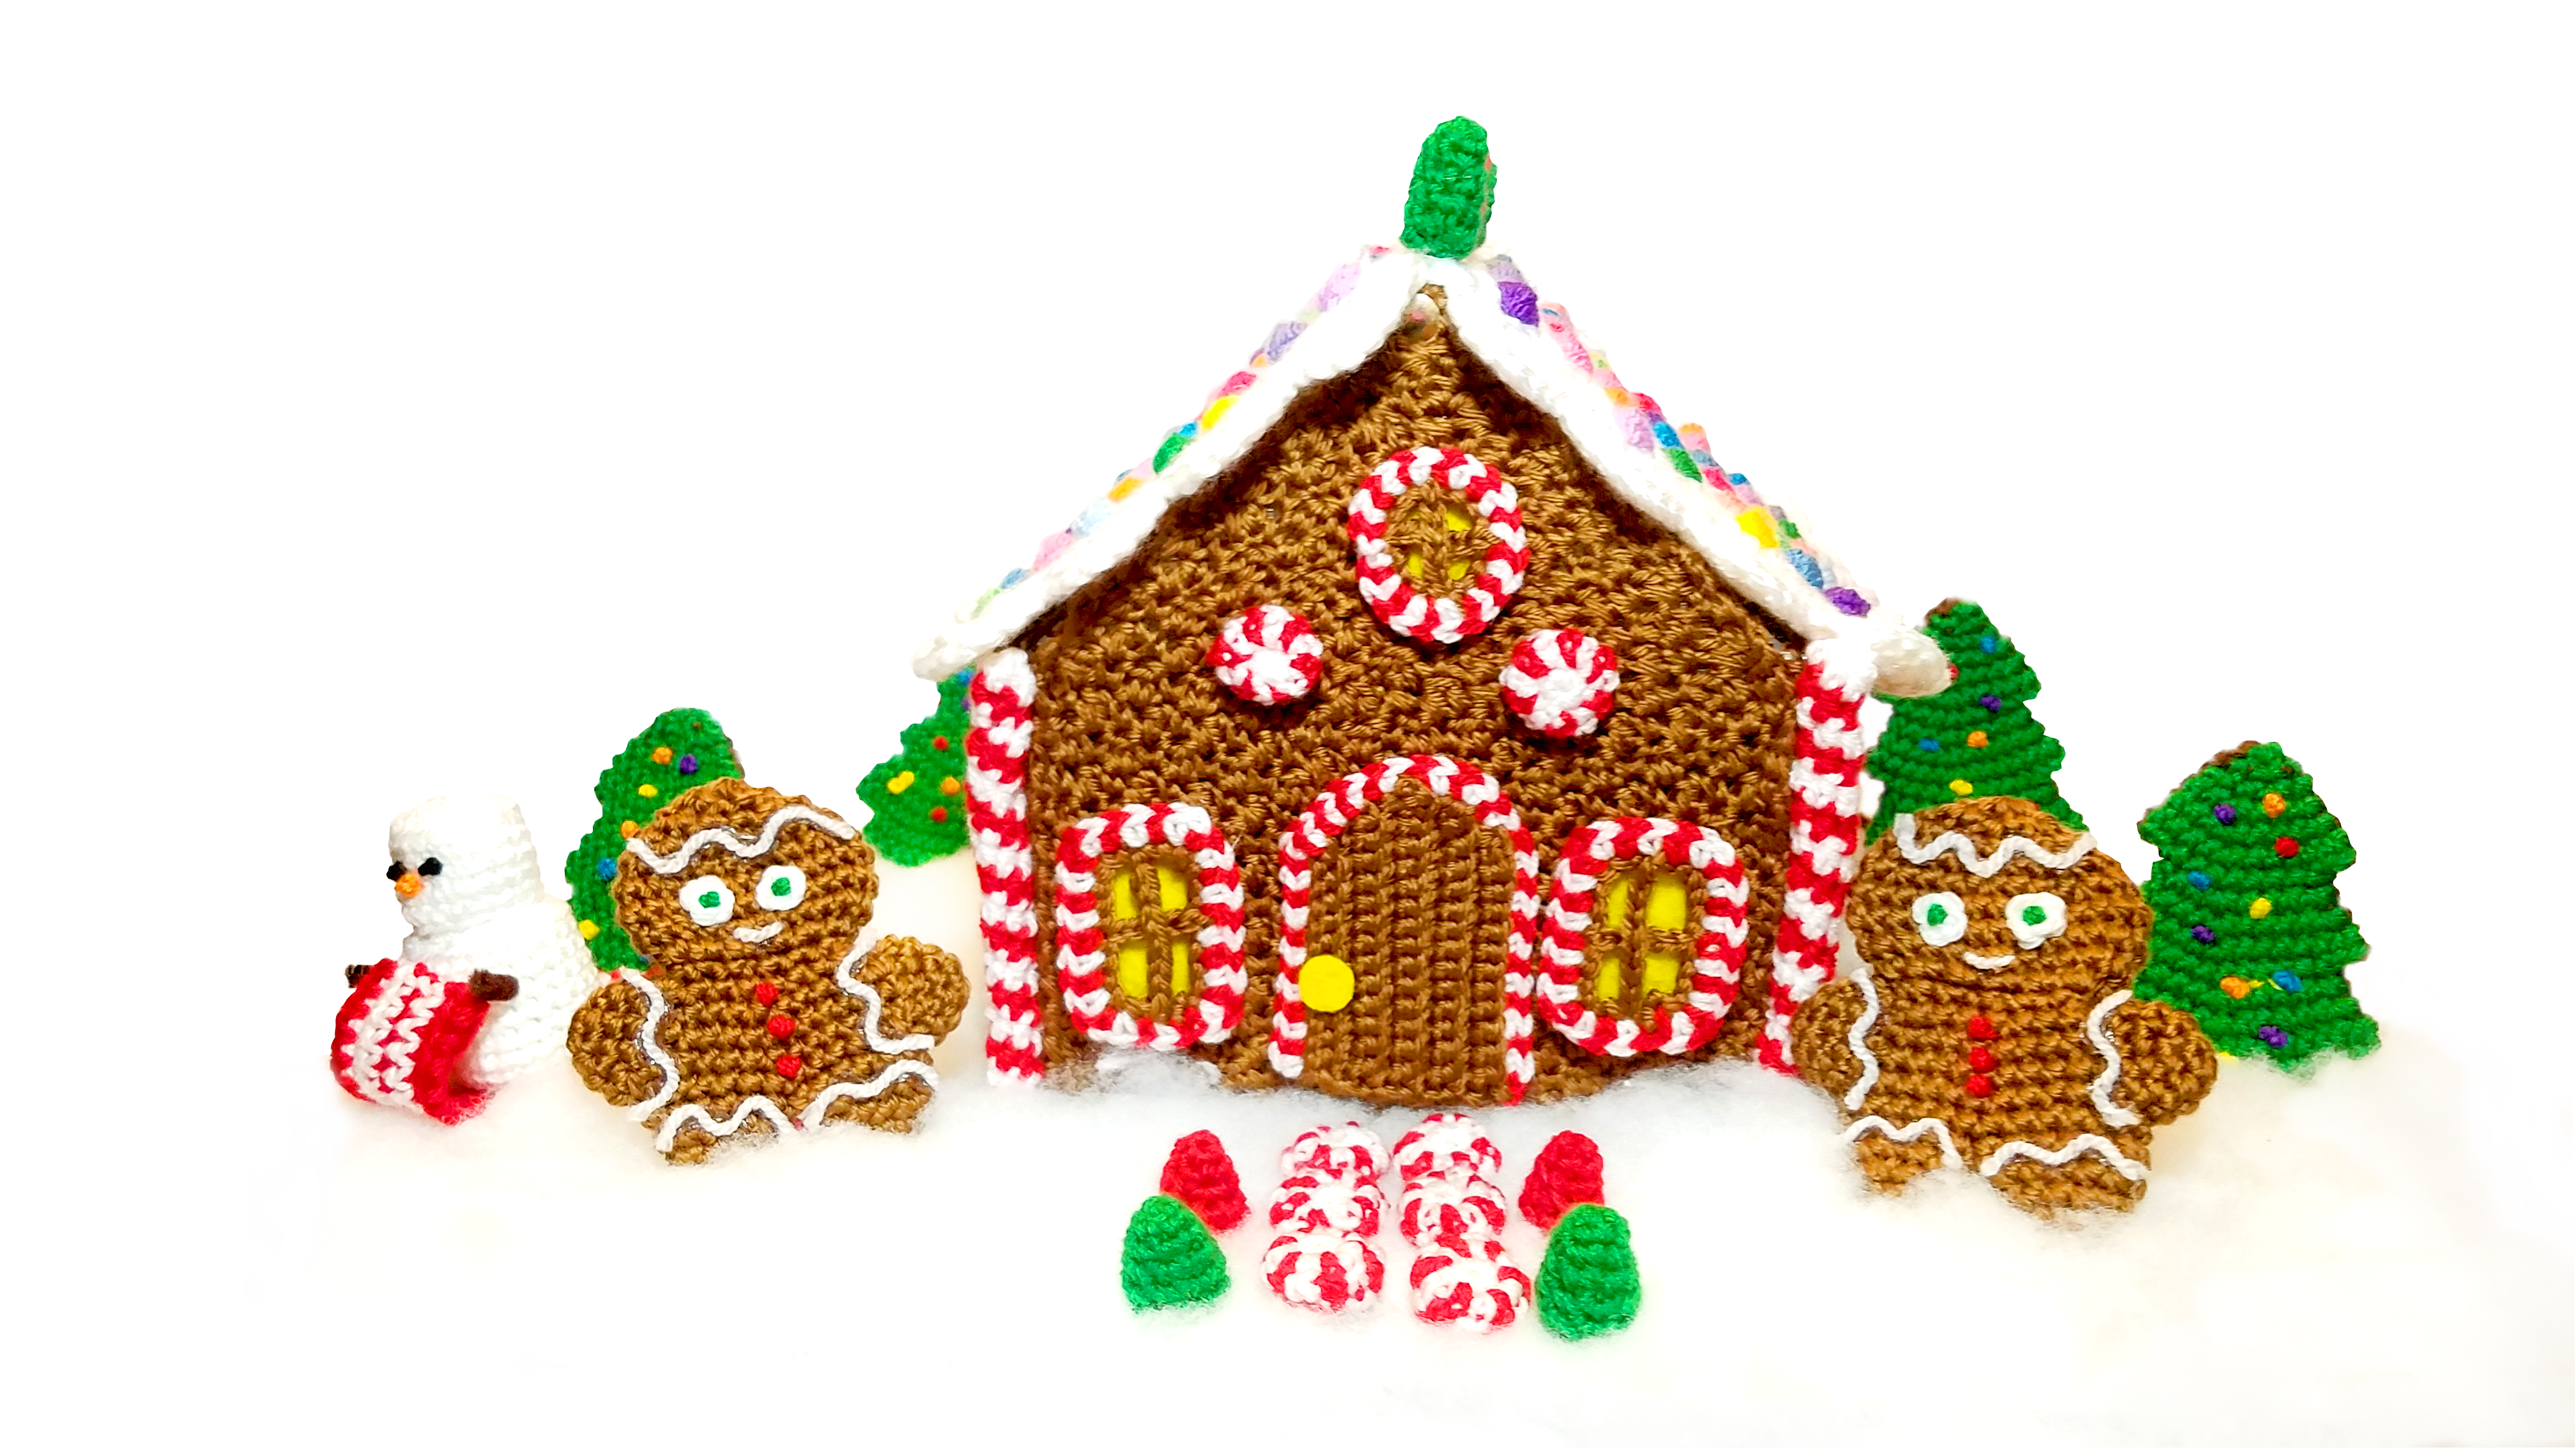 Download PNG image - Gingerbread House PNG Free Download 